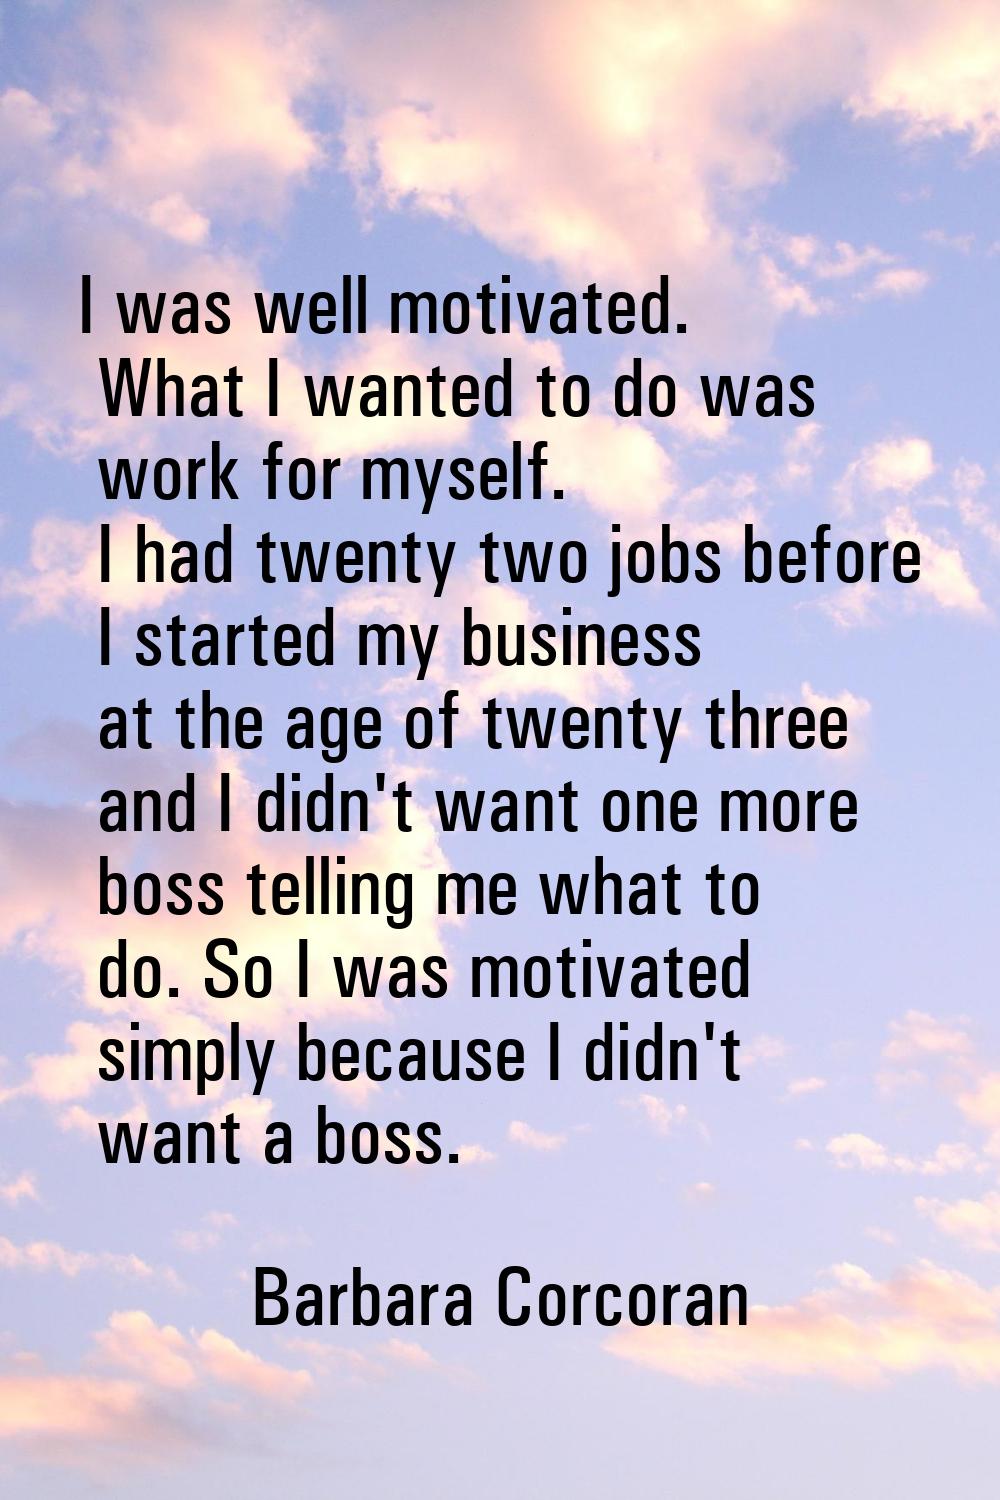 I was well motivated. What I wanted to do was work for myself. I had twenty two jobs before I start